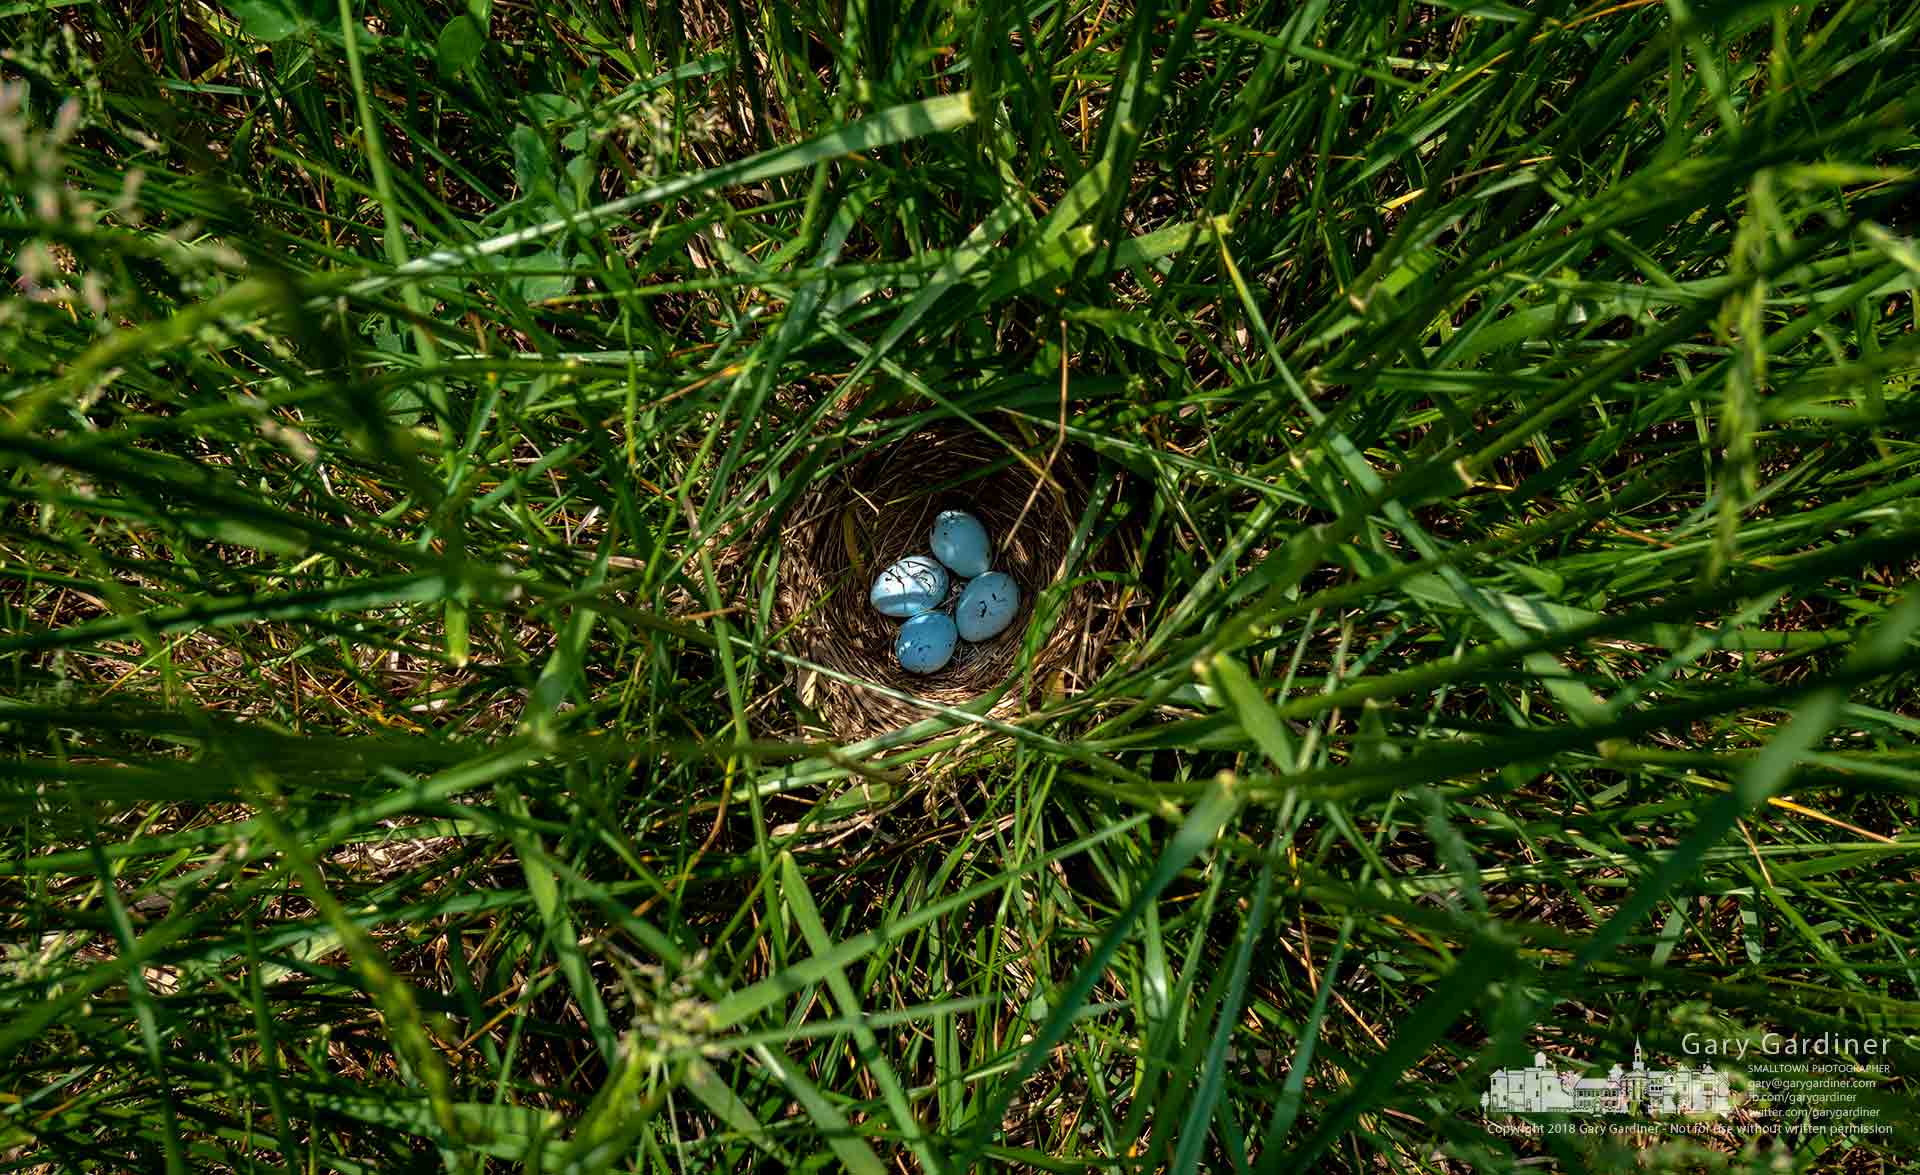 A red-winged blackbird nest with four eggs sits confined between tall stalks of hay grass in one of the fields at the Braun Farm. My Final Photo for May 21, 2018.